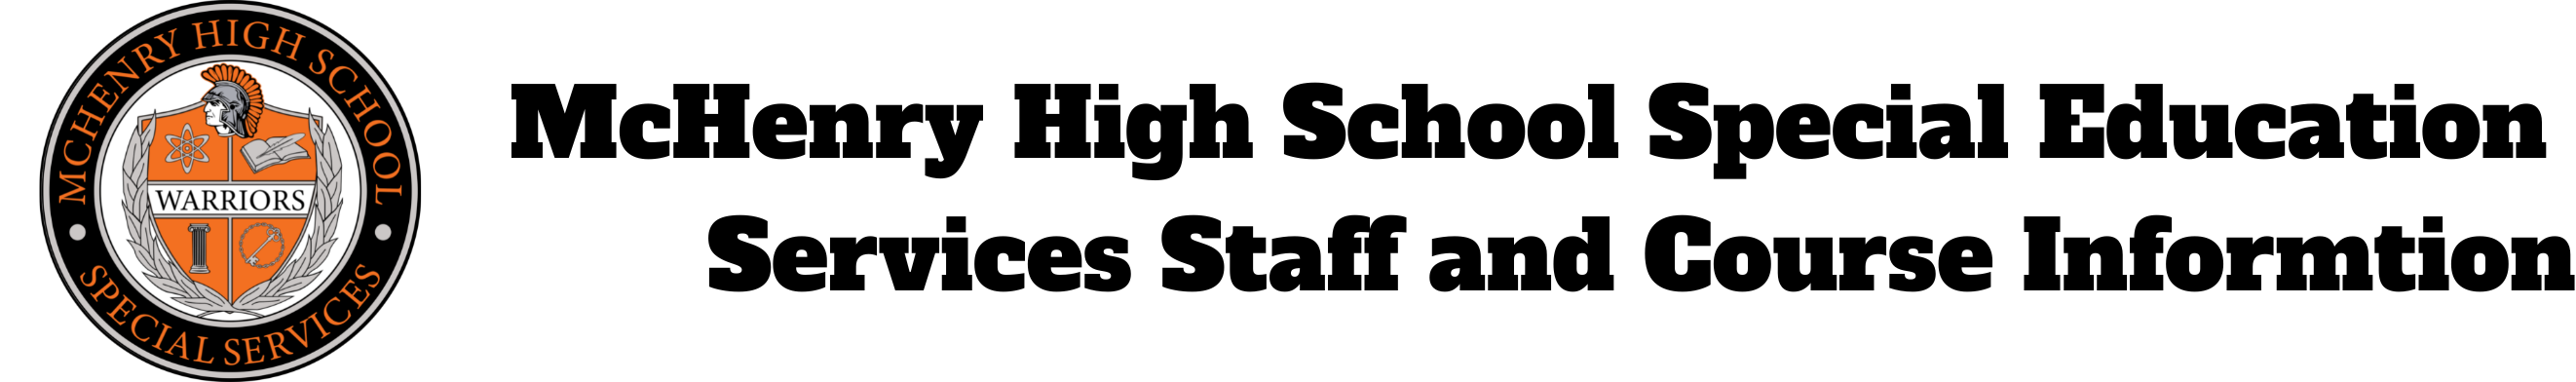 McHenry High School Special Education  Services Staff and Course Information